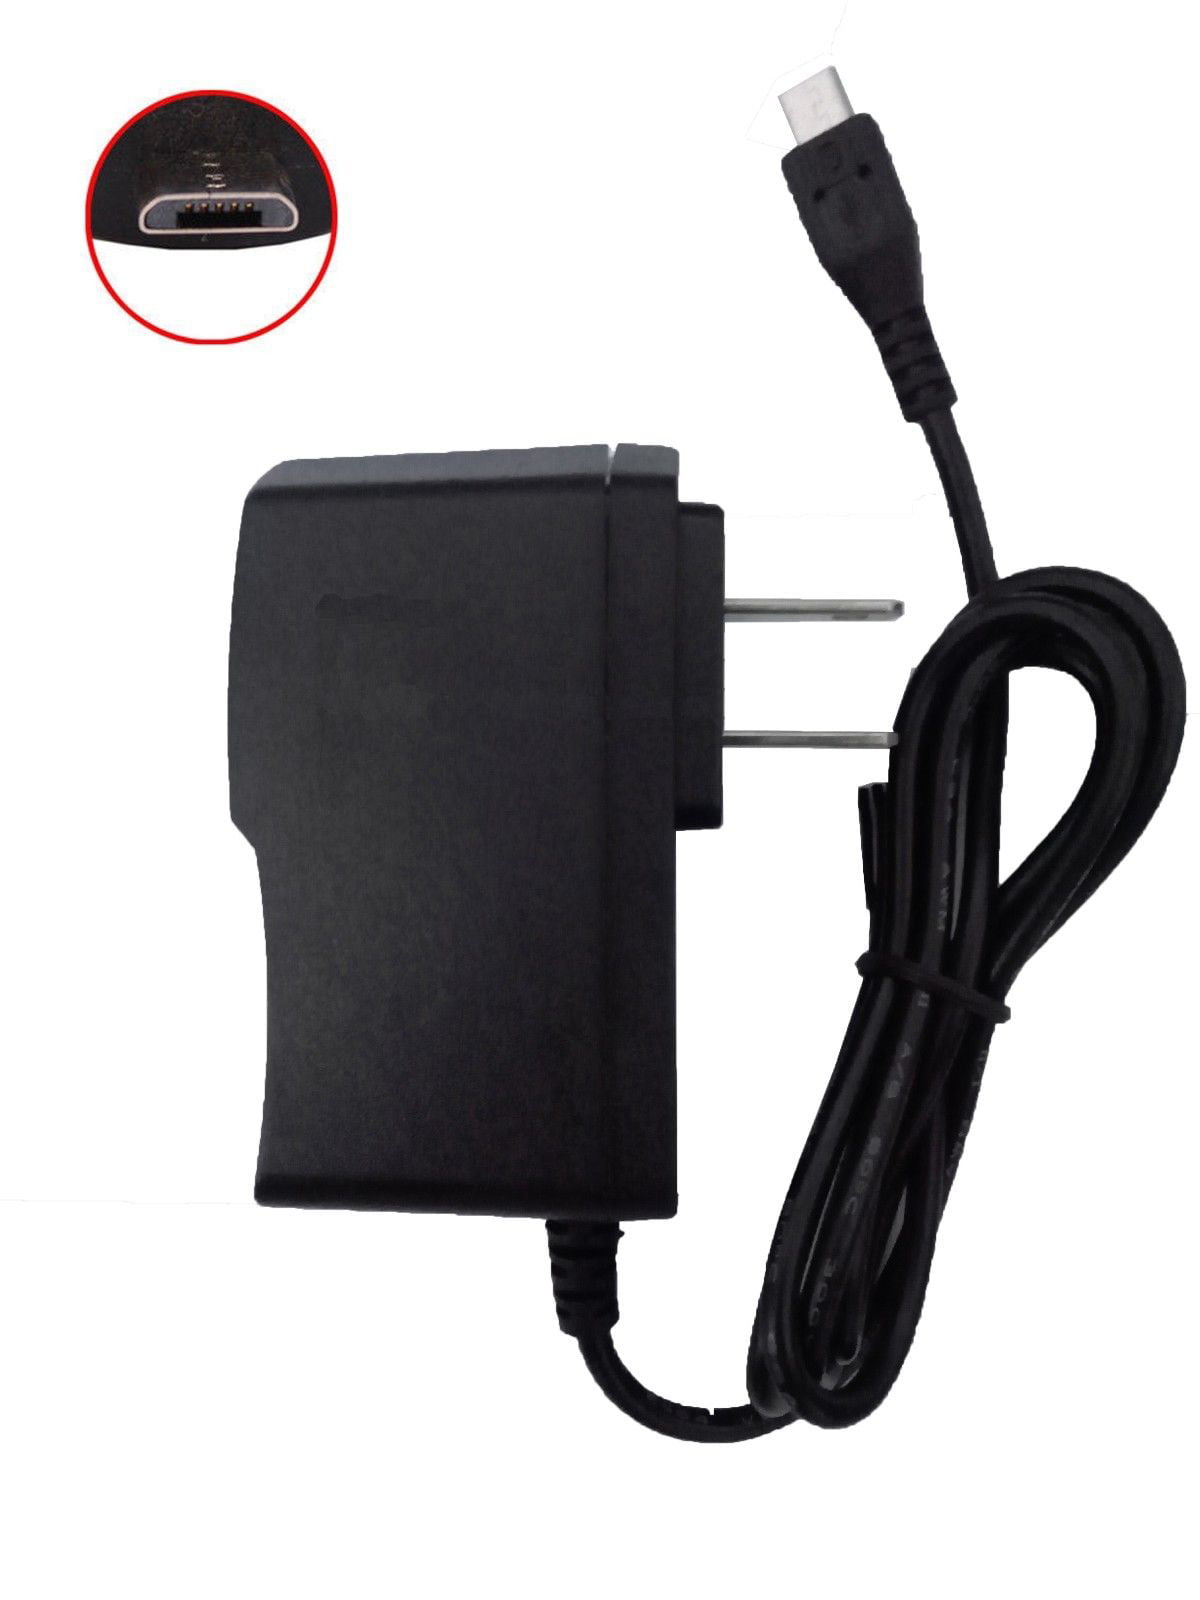 Taelectric Replacement Wall Charger for Barnes and Noble Nook Color ereader 